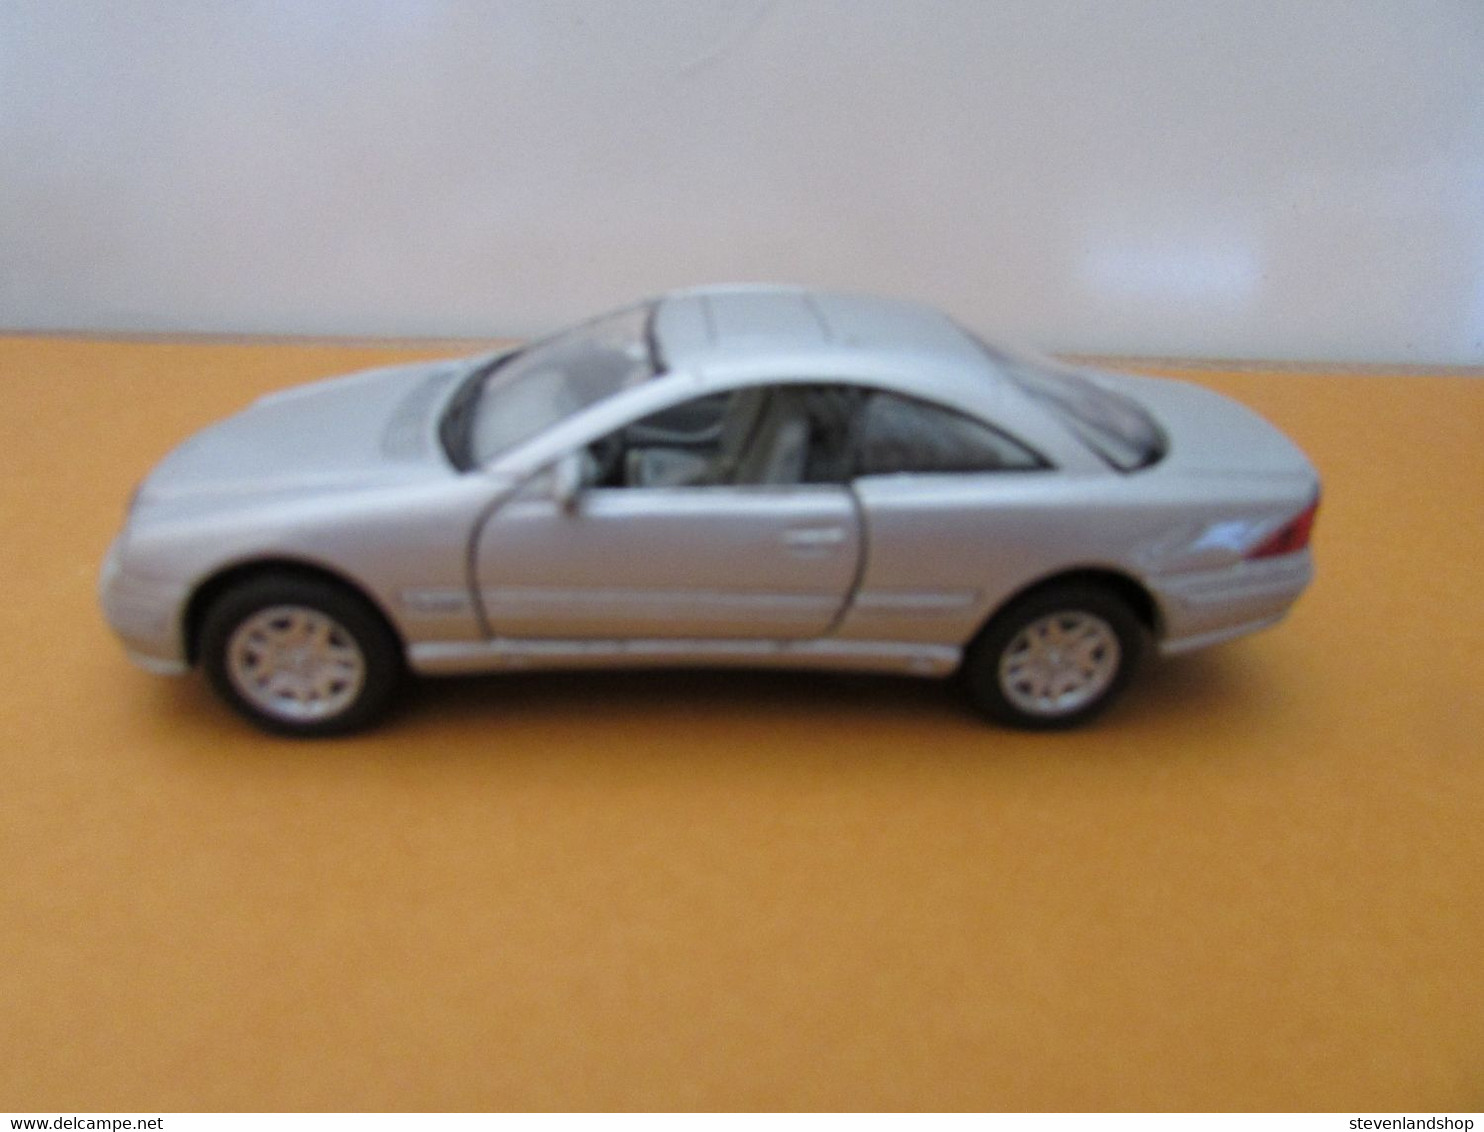 MERCEDES CL 600 Silver, - Scale 1:32